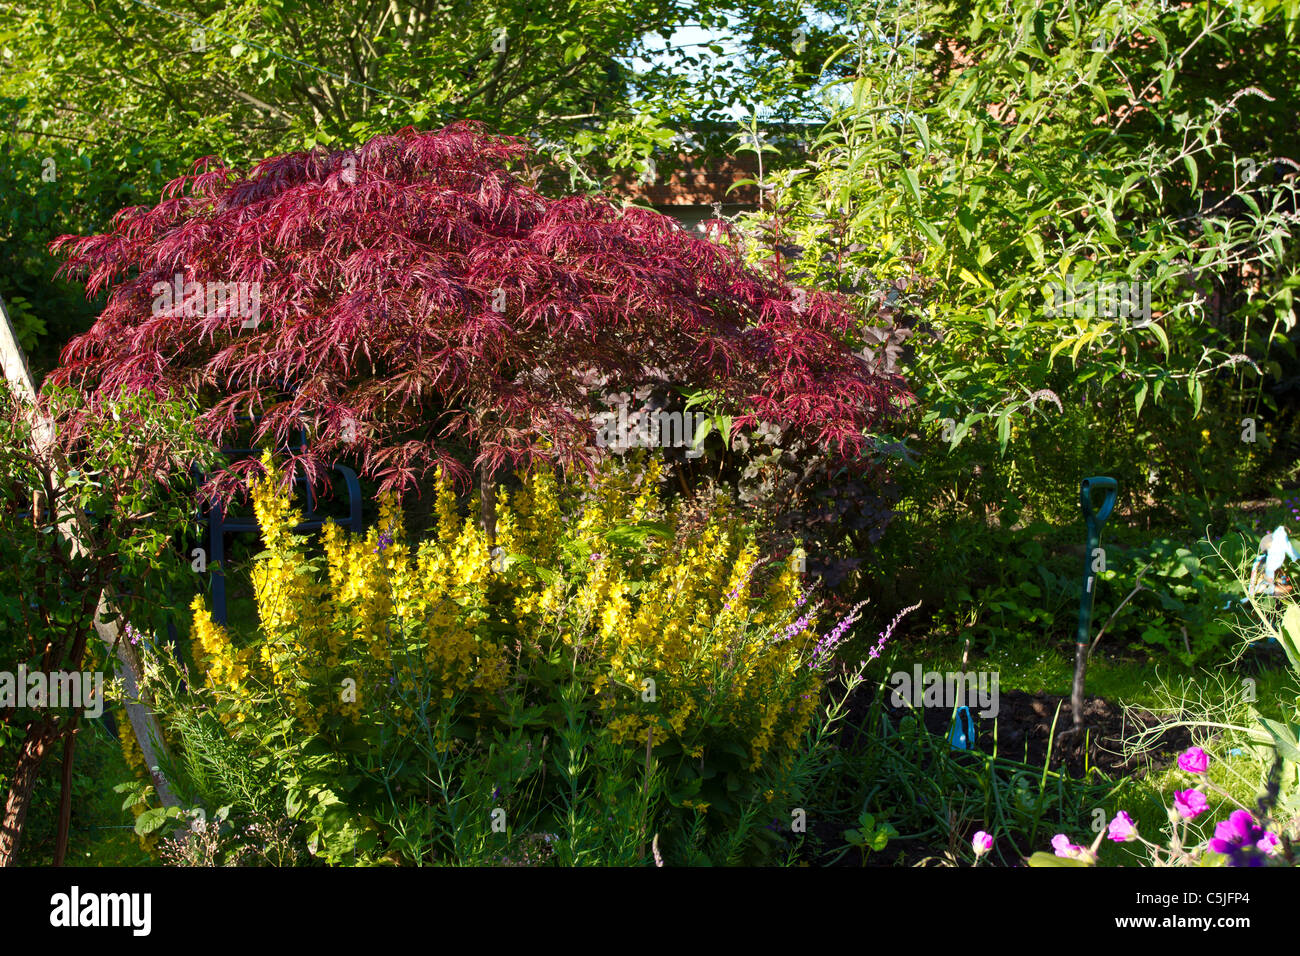 Overgrown English Garden packed with flowers, shrubs and trees. Stock Photo